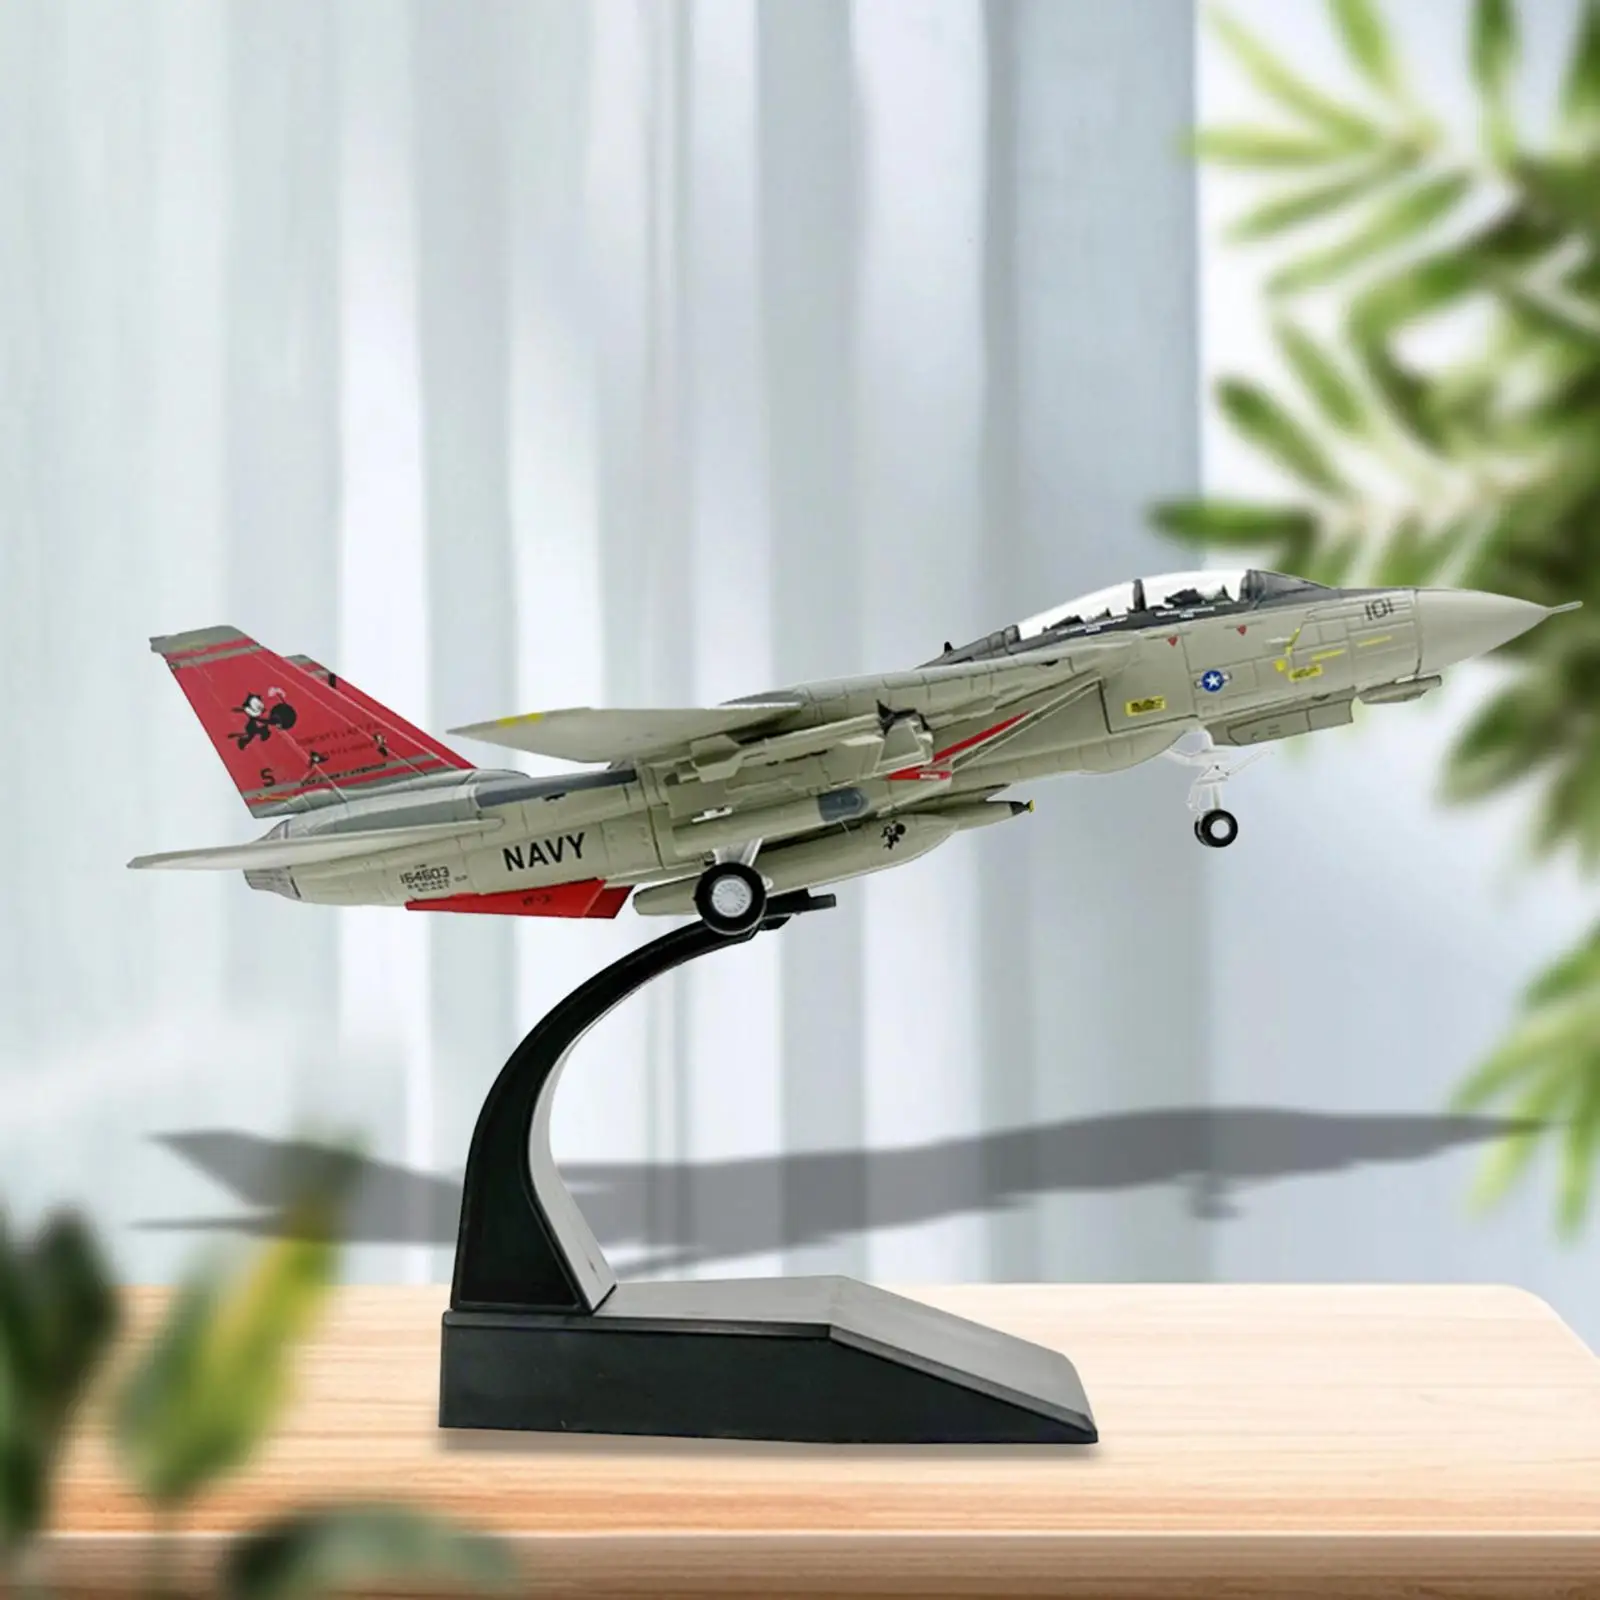 Diecast Alloy Model 1:100 F 14 USA Carrier Aircraft Airplane Fighter for Bedroom Bookshelf TV Cabinet Cafes Aviation Commemorate